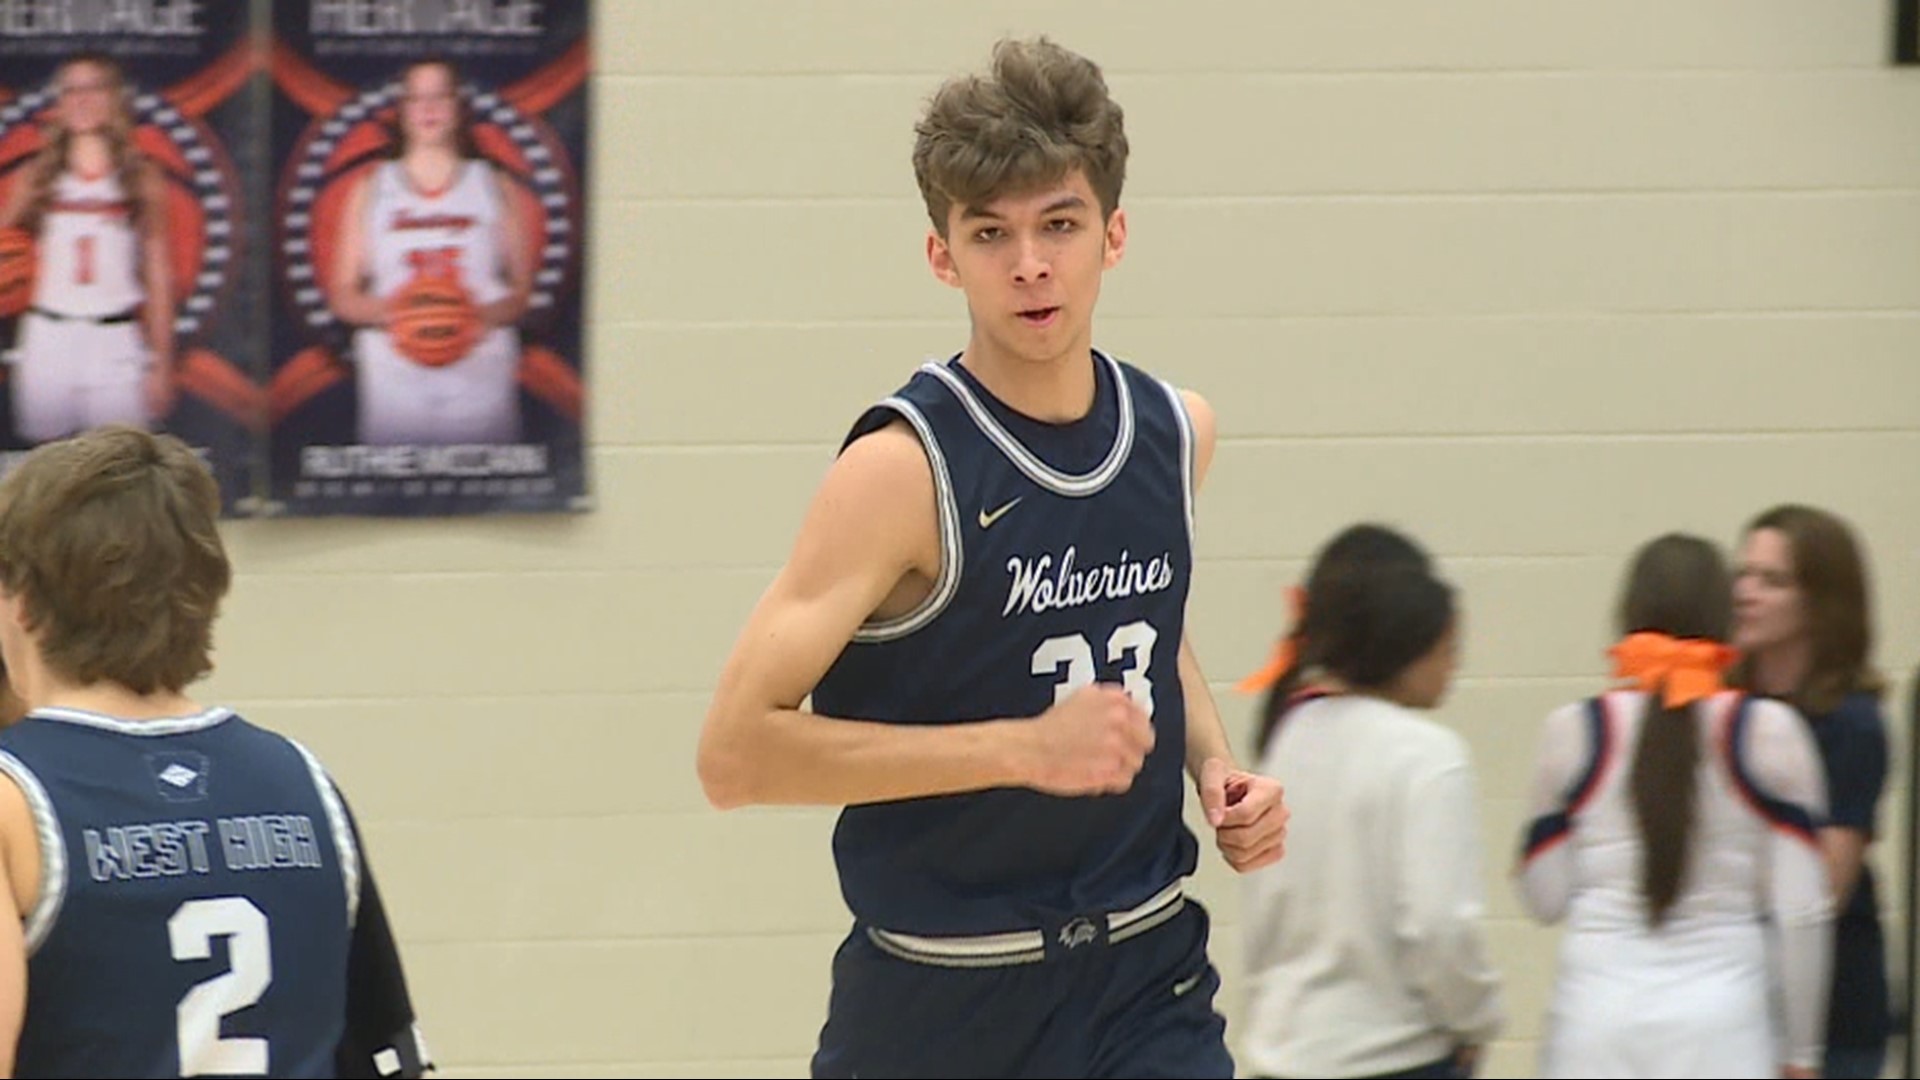 The McDonald's All-American Game nominee hopes to lead the Wolverines to a state title in the sport he loves and that runs in his family.